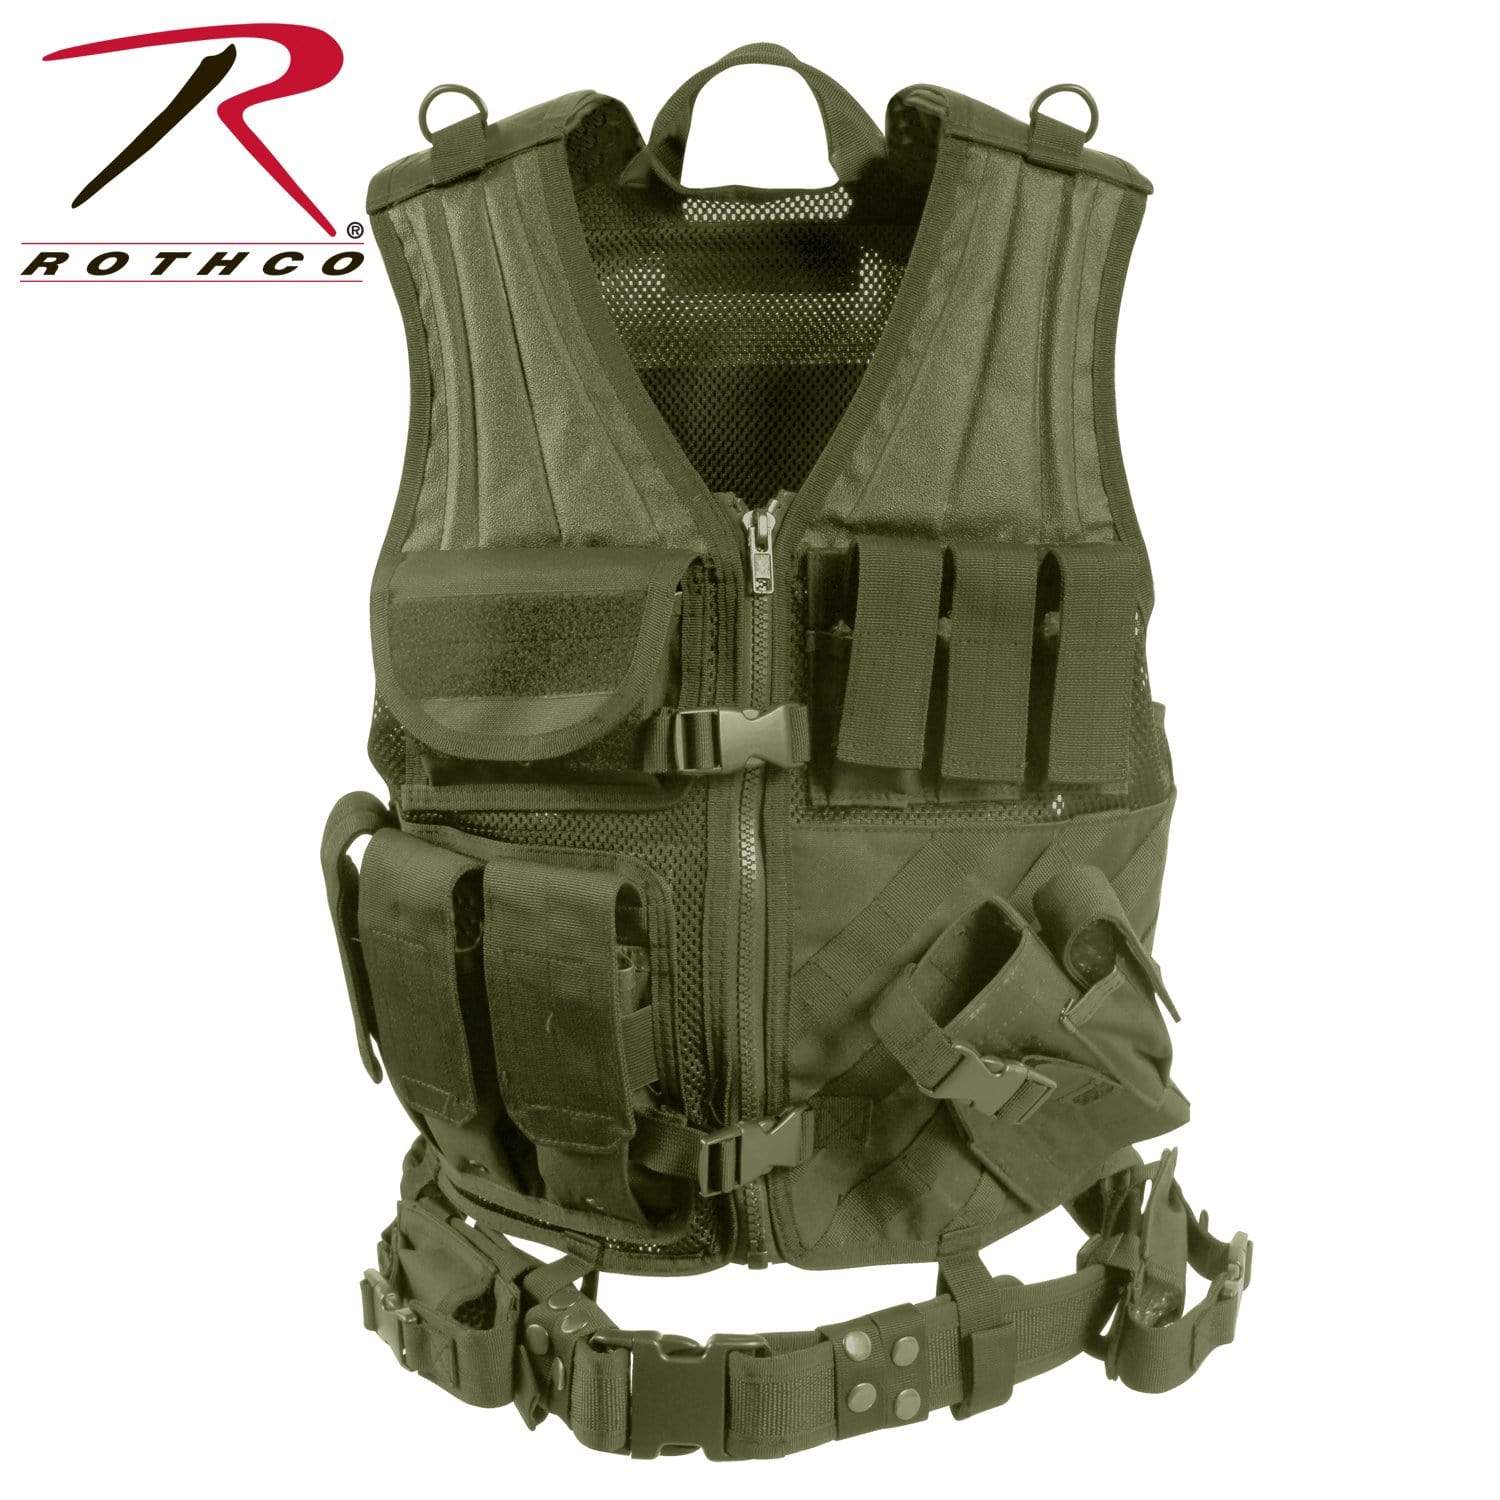 Rothco Cross Draw MOLLE Tactical Vest - Olive Drab - Eminent Paintball And Airsoft